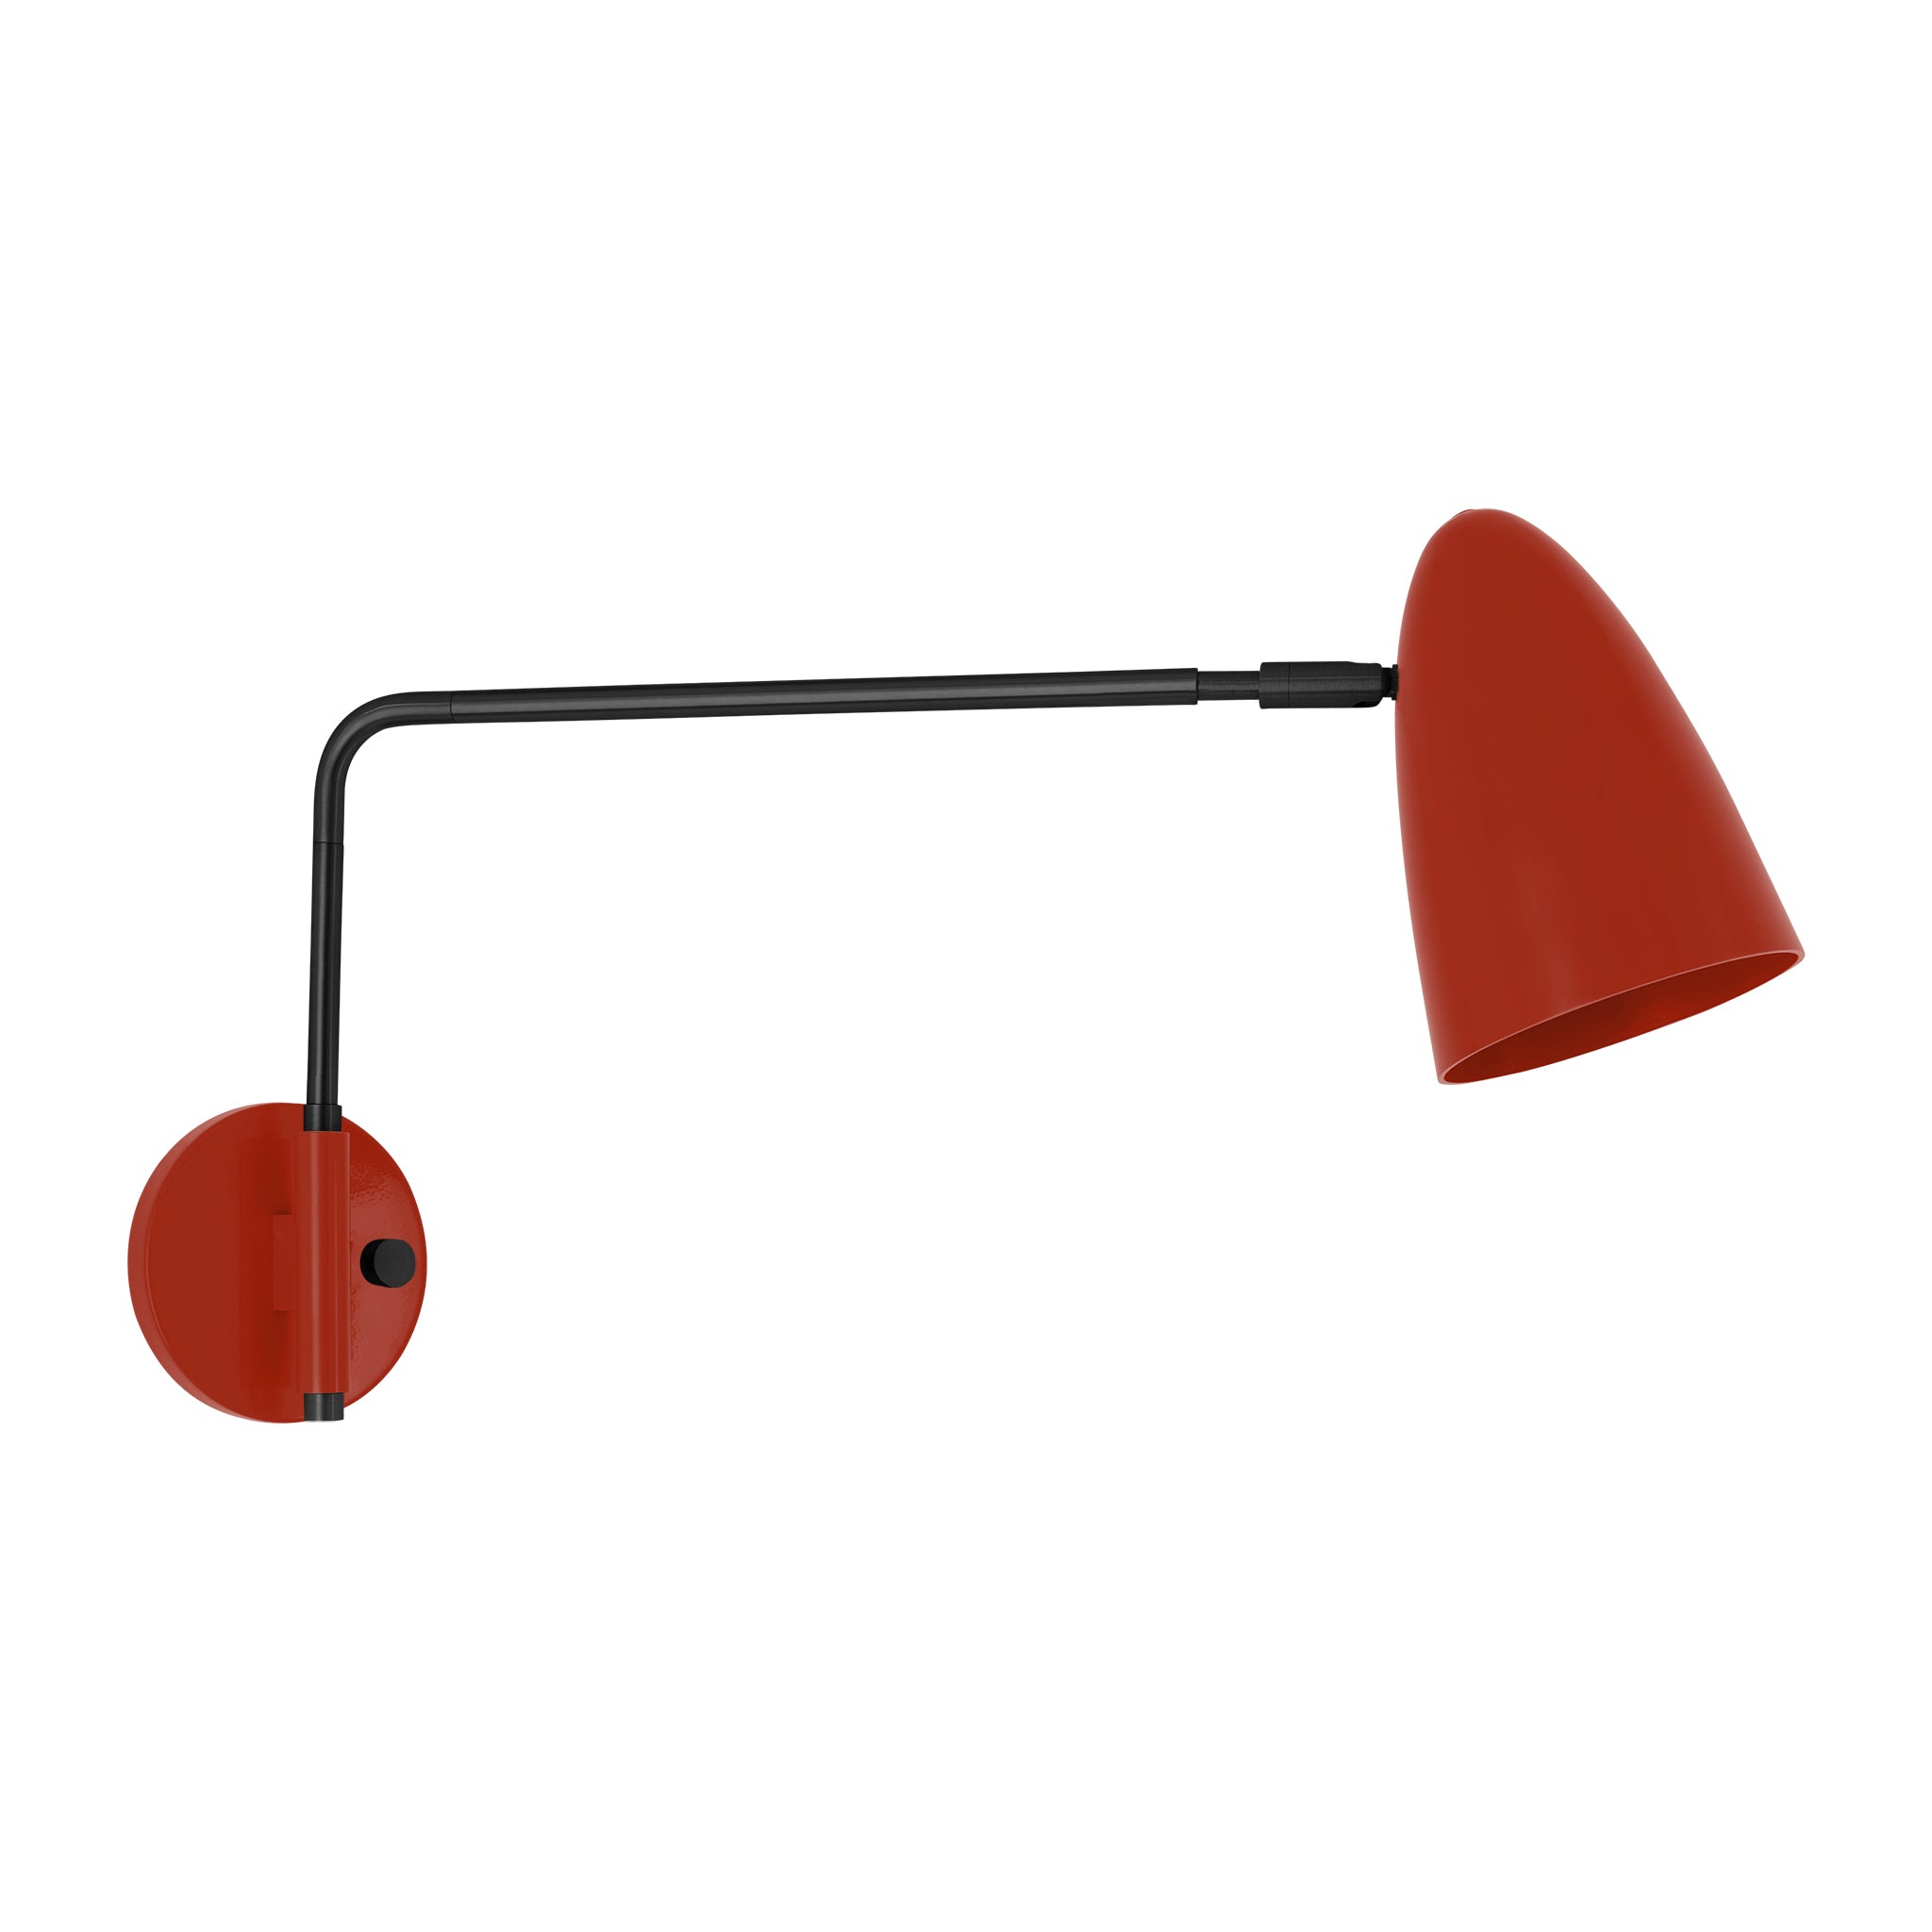 Black and riding hood red color Boom Swing Arm sconce Dutton Brown lighting